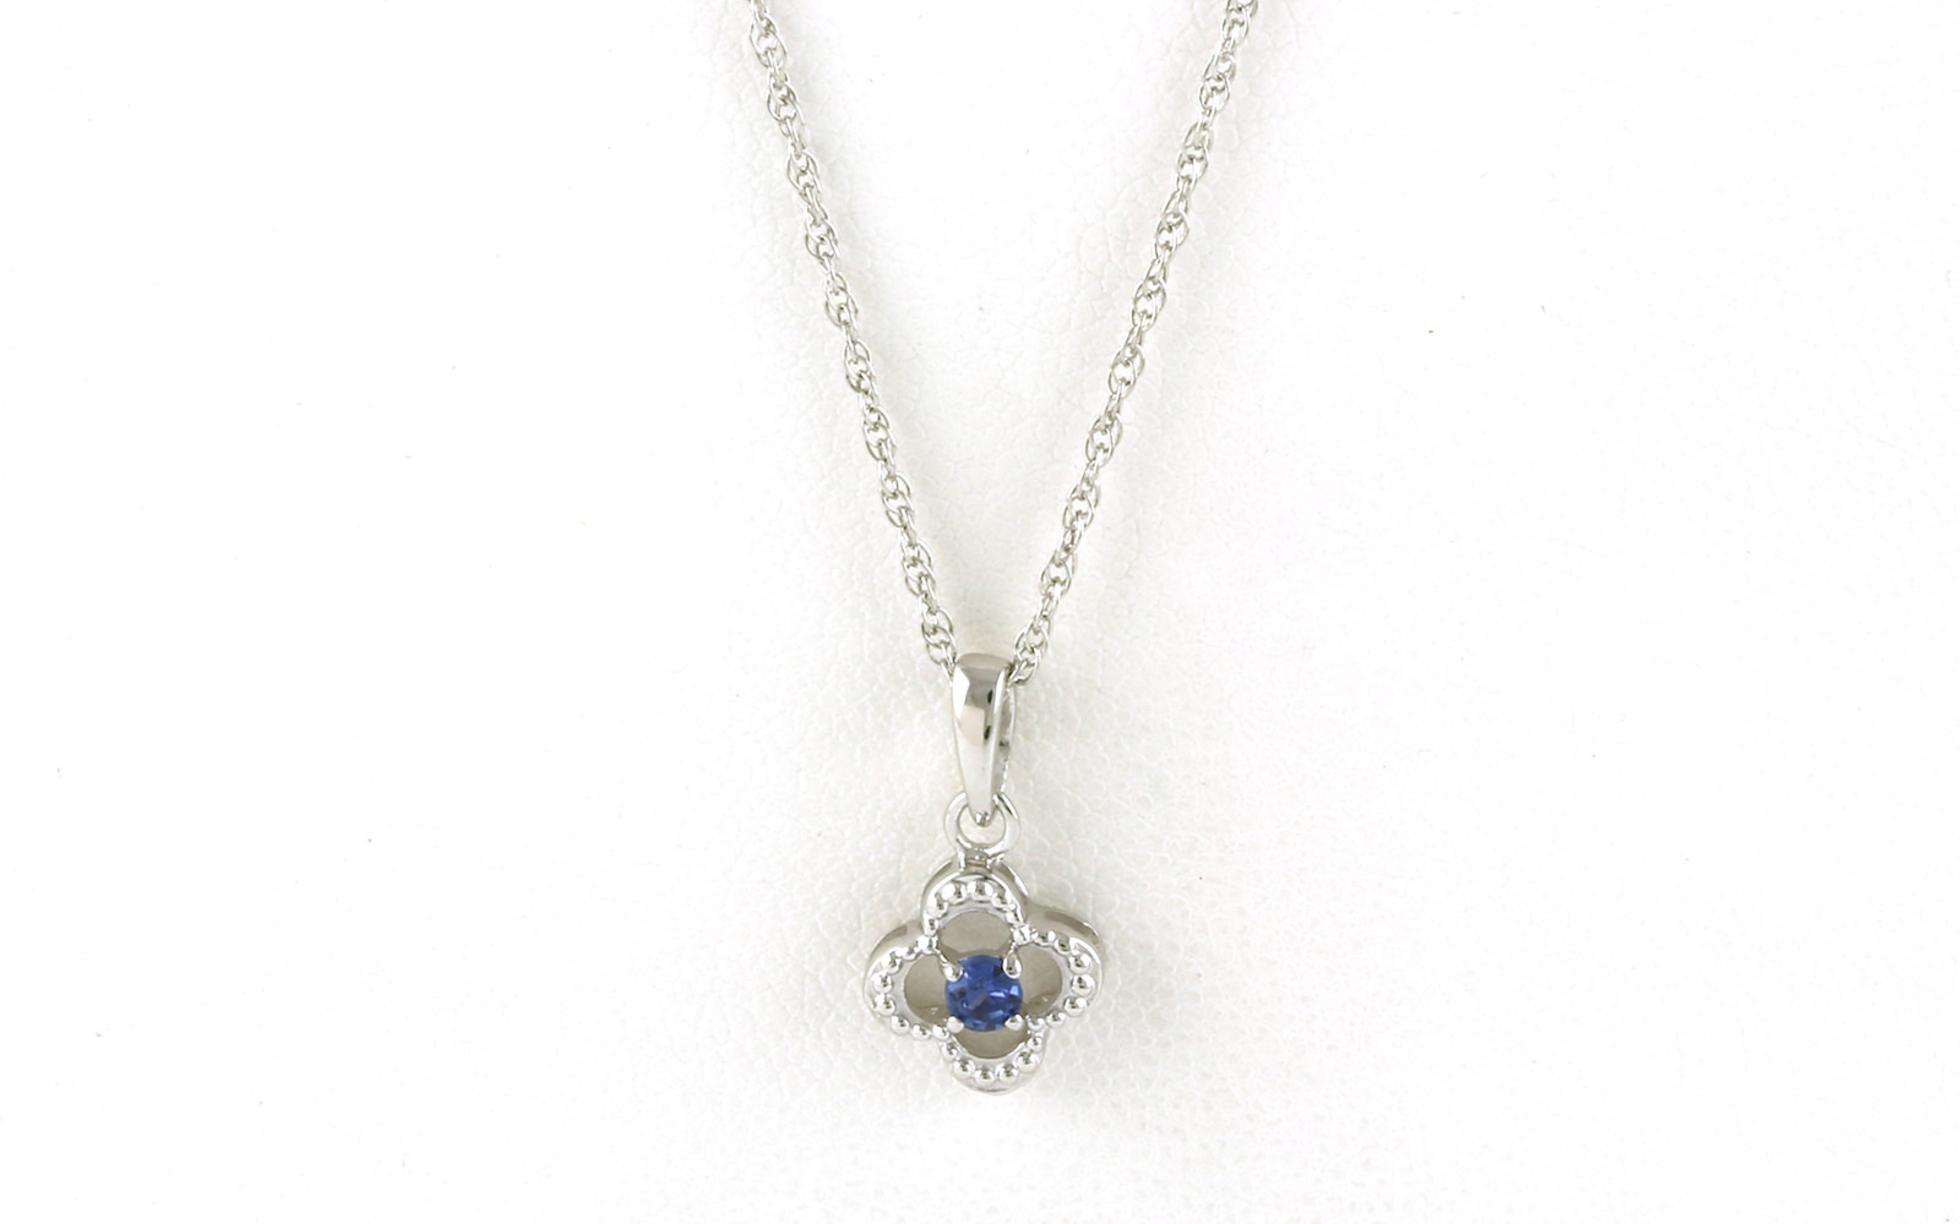 Little Flower Solitaire Montana Yogo Sapphire Necklace with Bead Details in Sterling Silver